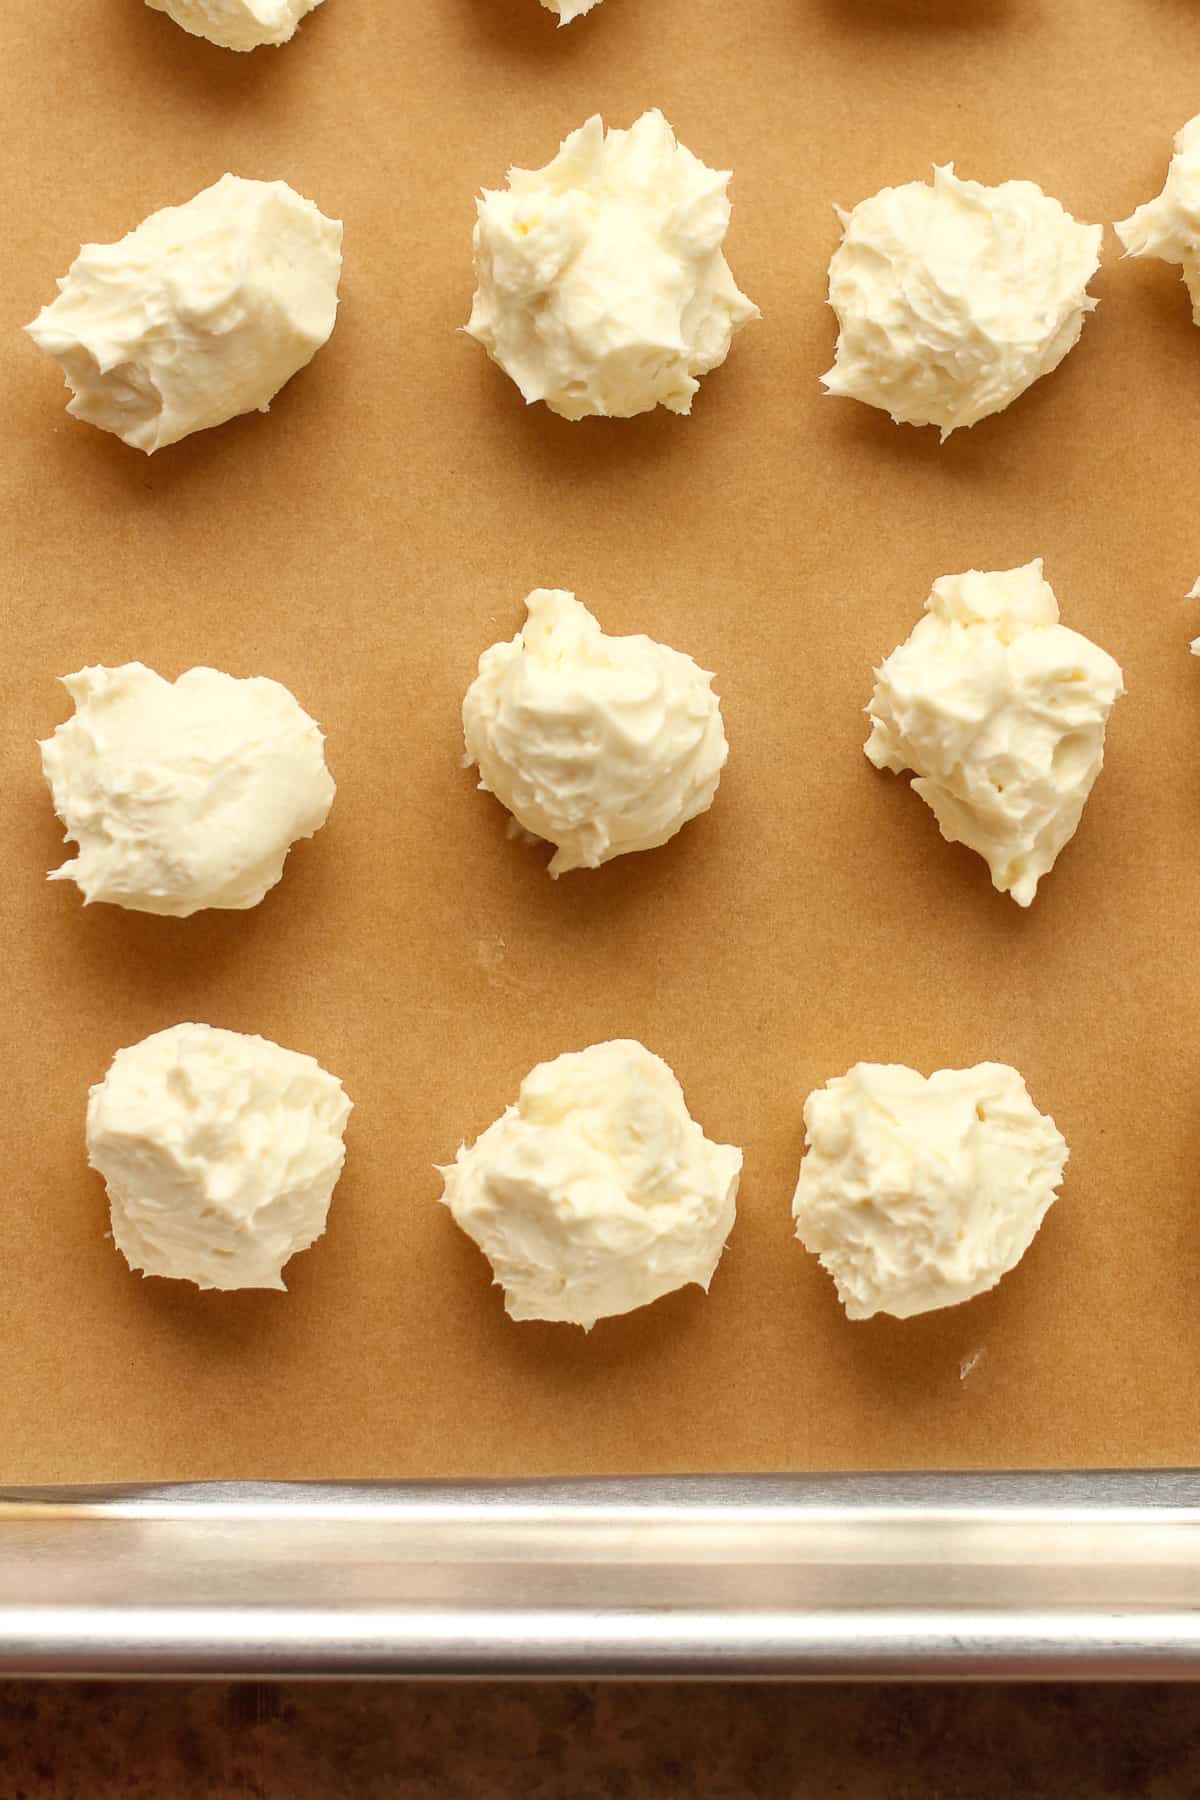 A pan of the cream cheese rounds.